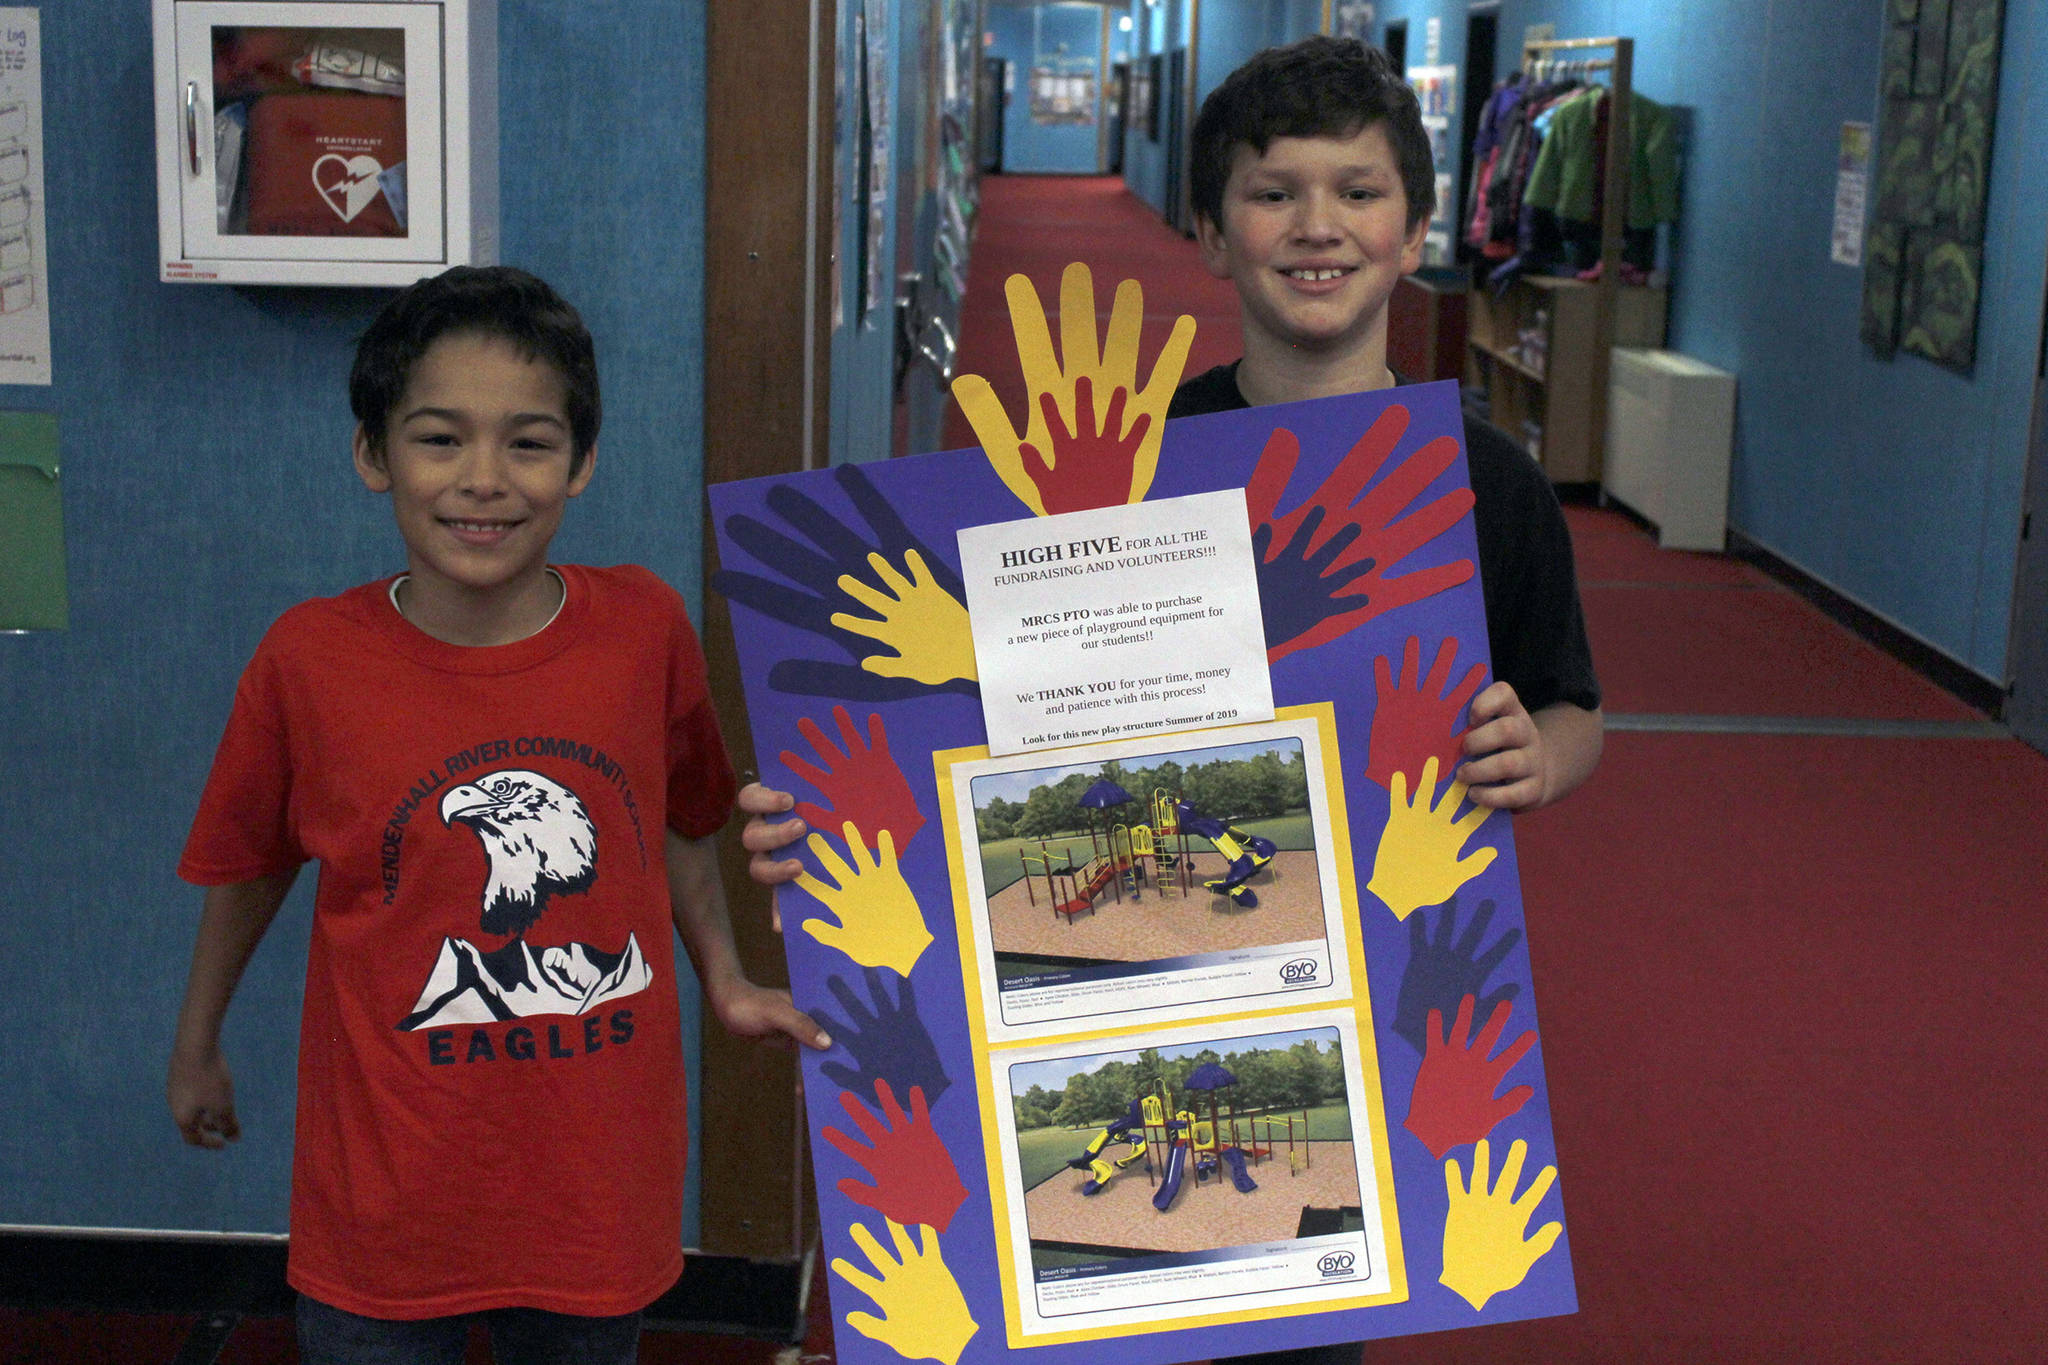 Mendenhall River Community School fourth graders Matthew Acosta-Abreu (left) and Logan Carriker hold a poster that displays a new piece of playground equipment the school is getting.                                 <span class="neFMT neFMT_PhotoCredit">^</span>                                <span class="neFMT neFMT_PhotoCredit"><strong>Alex McCarthy </strong></span>                                <span class="neFMT neFMT_PhotoCredit">| Juneau Empire</span>